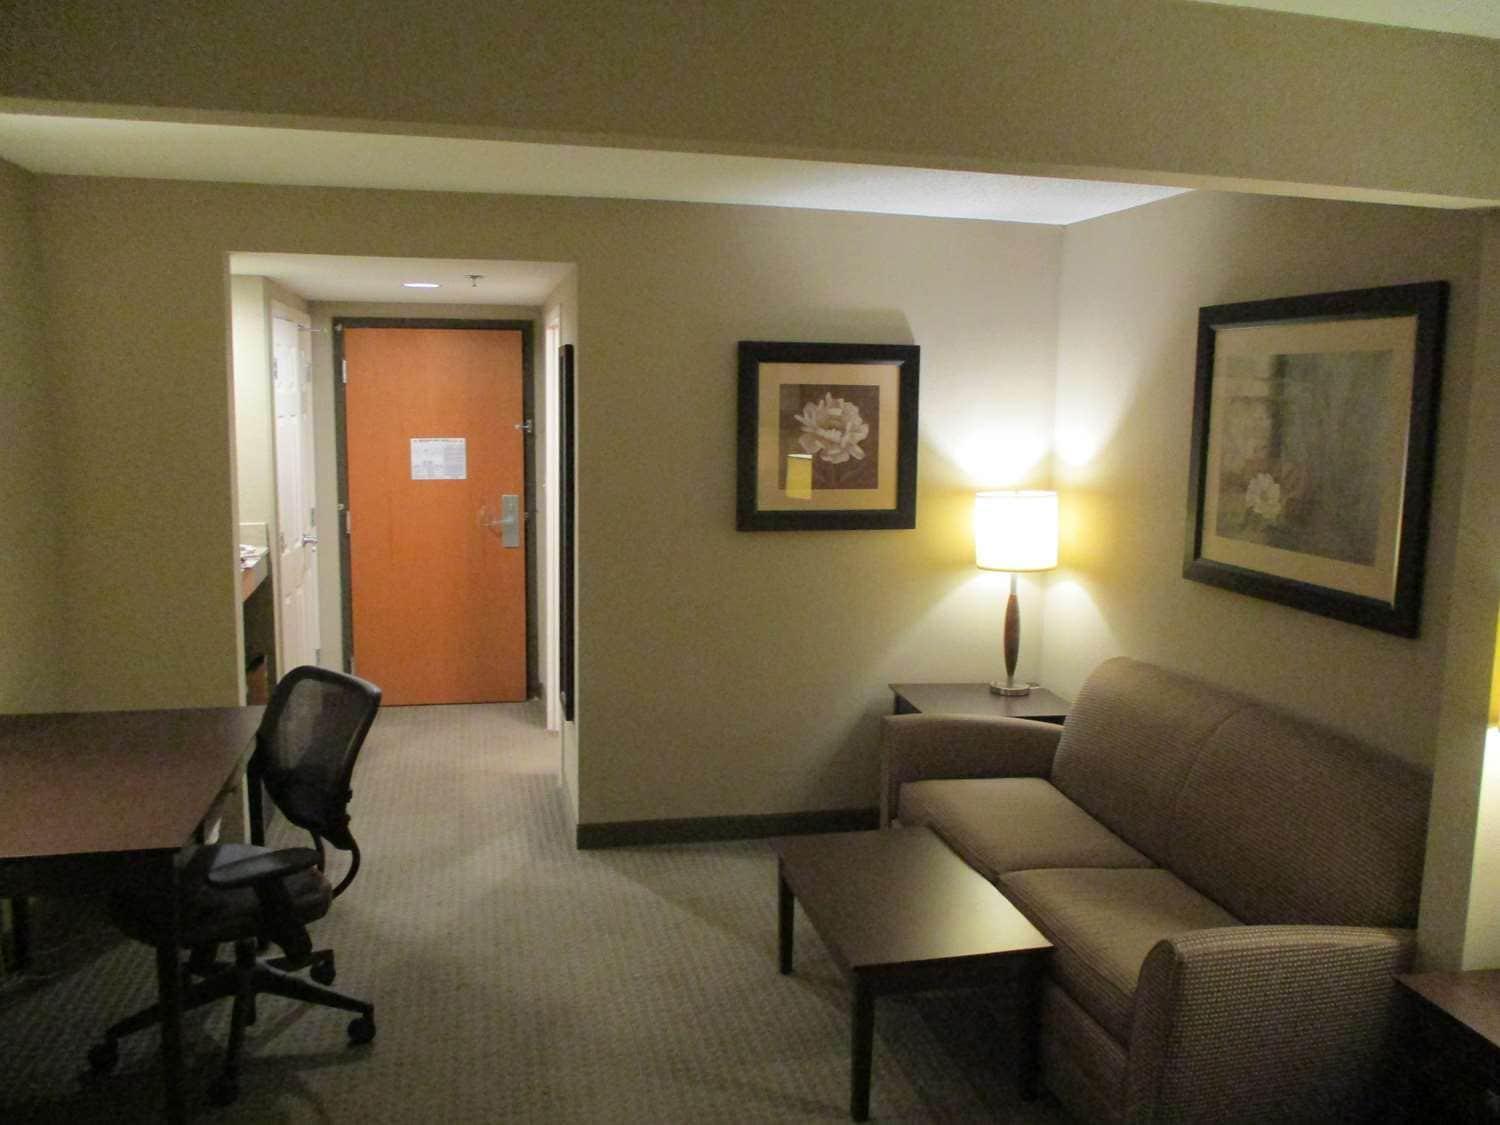 Research Park Inn St Louis West Chesterfield Saint Charles Room photo